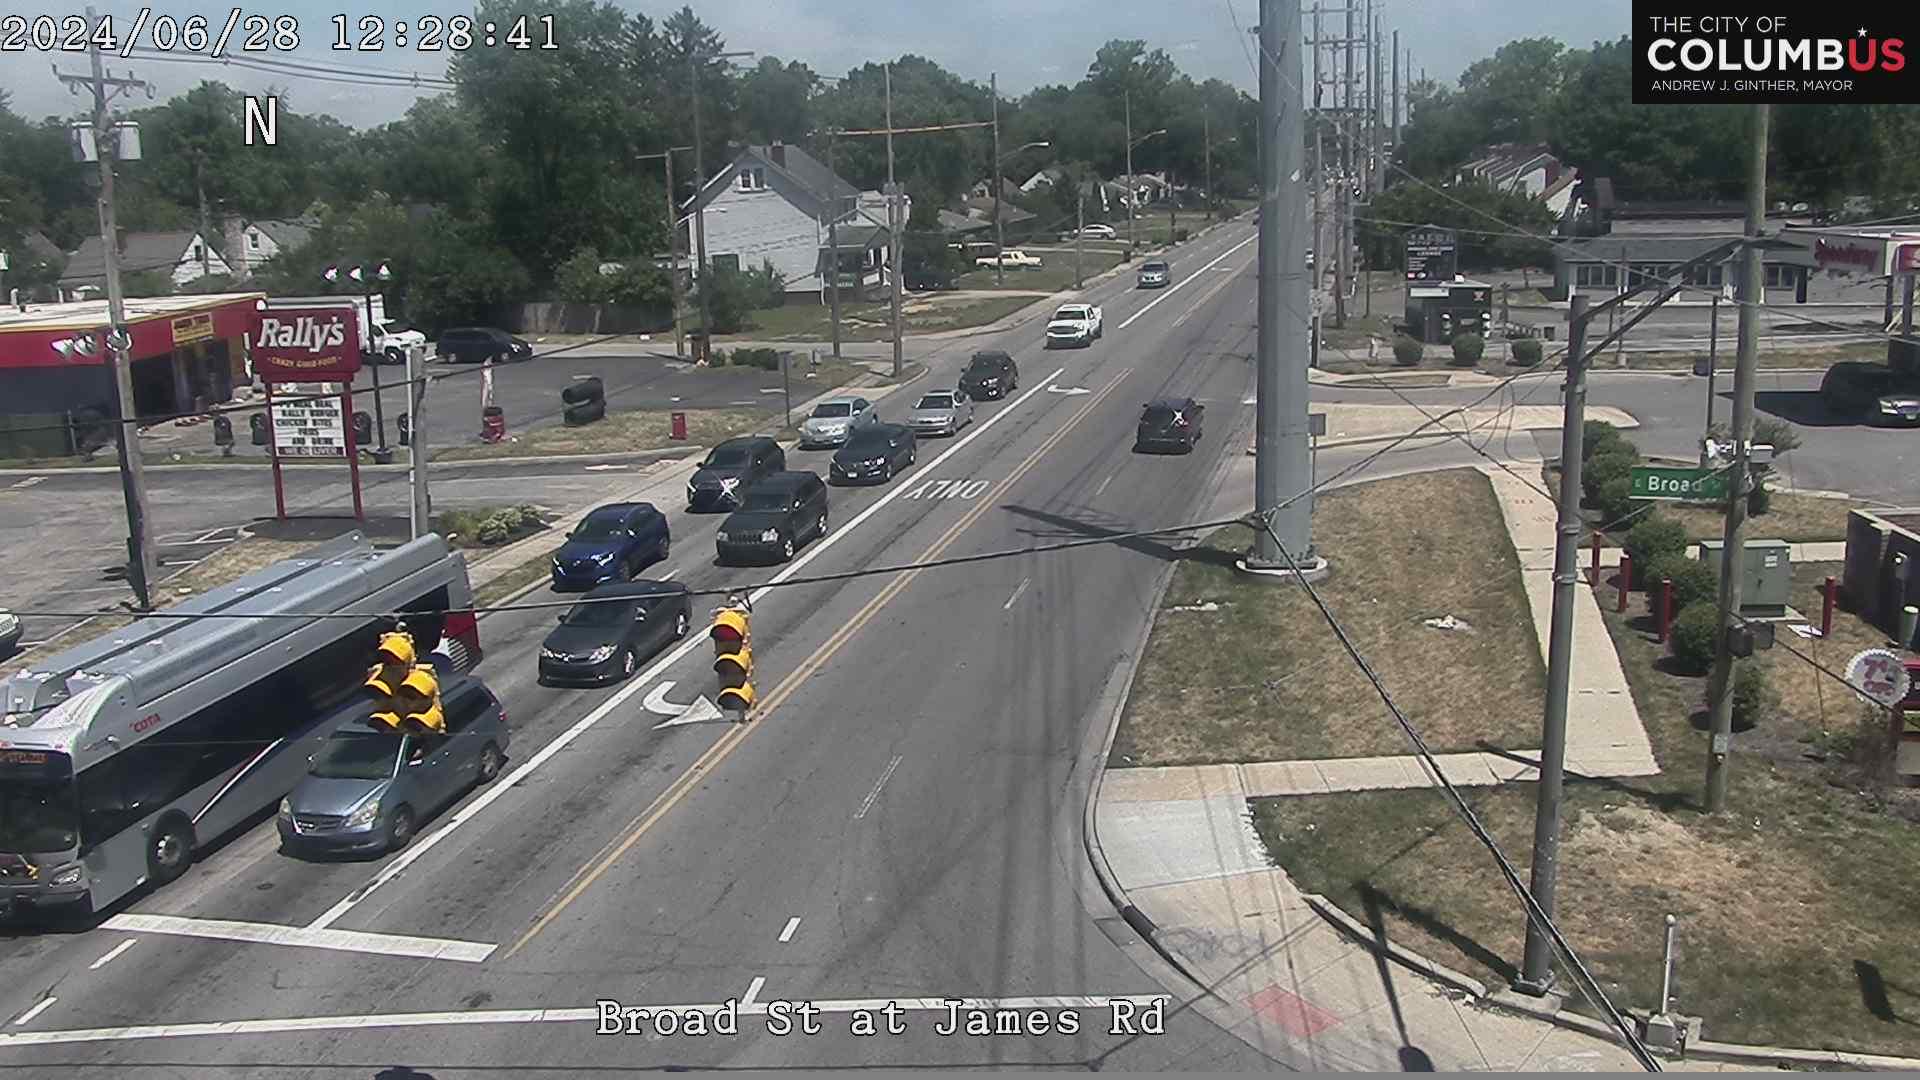 Traffic Cam Mayfair: City of Columbus) Broad St at James Rd